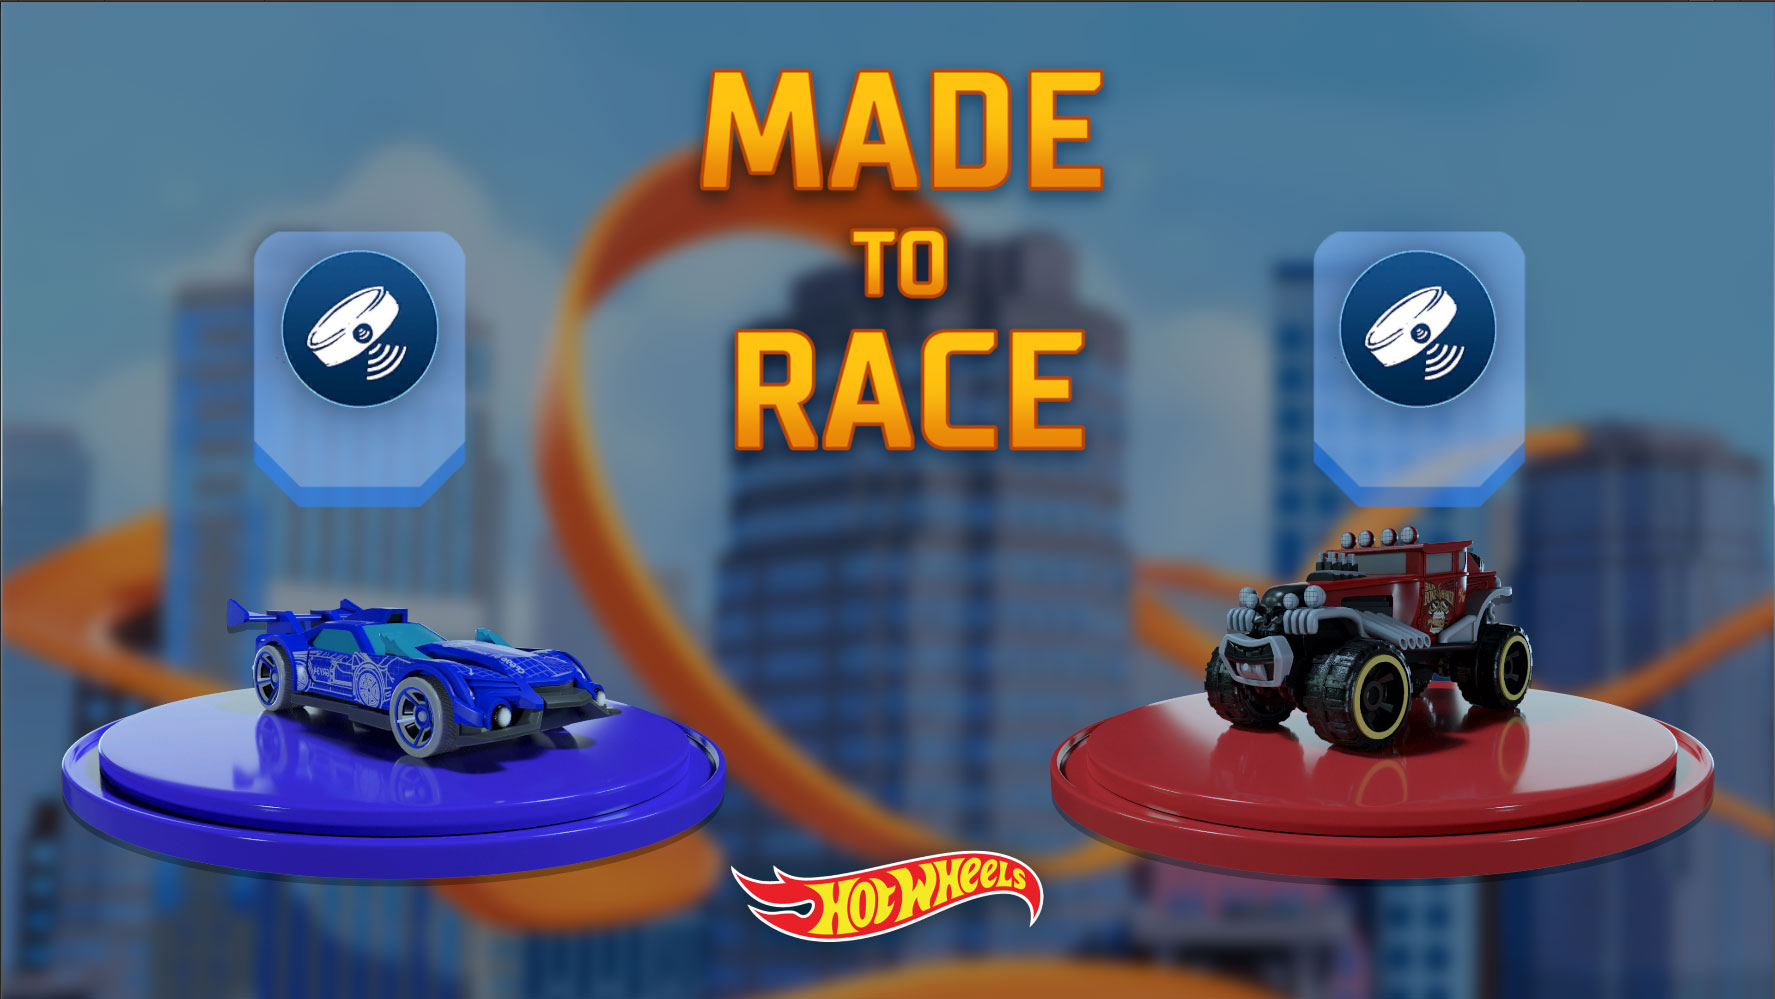 The Opening Screen of the 'Made To Race" game at Hot Wheels Champion Experience.